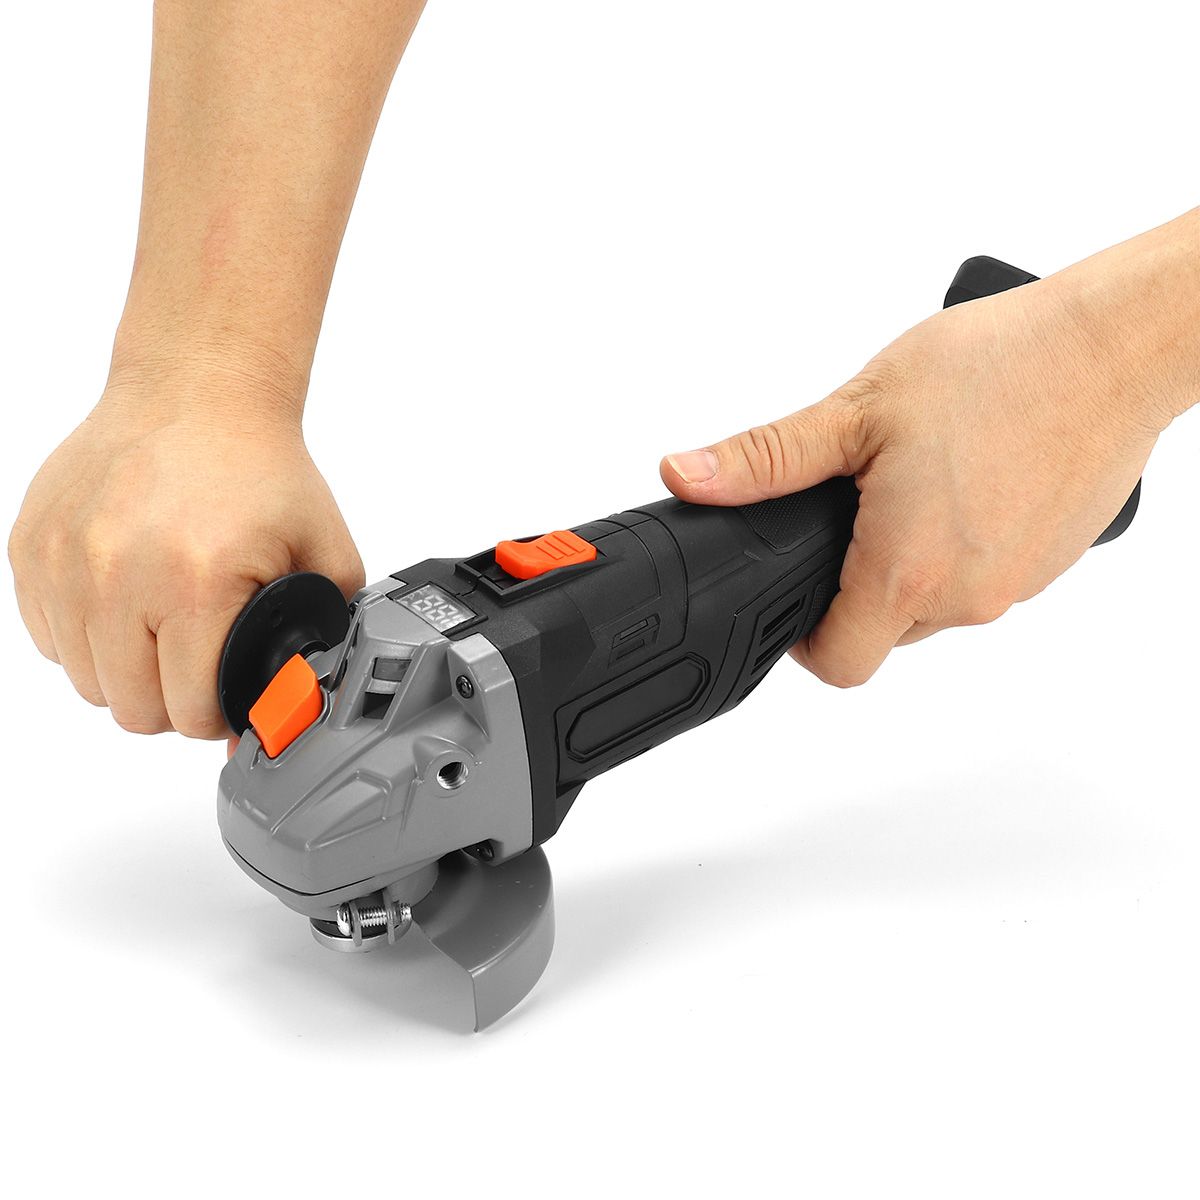 800W-100mm-Cordless-Brushless-Angle-Grinder-Fit-for-18V-Makita-Li-ion-Battery-1689004